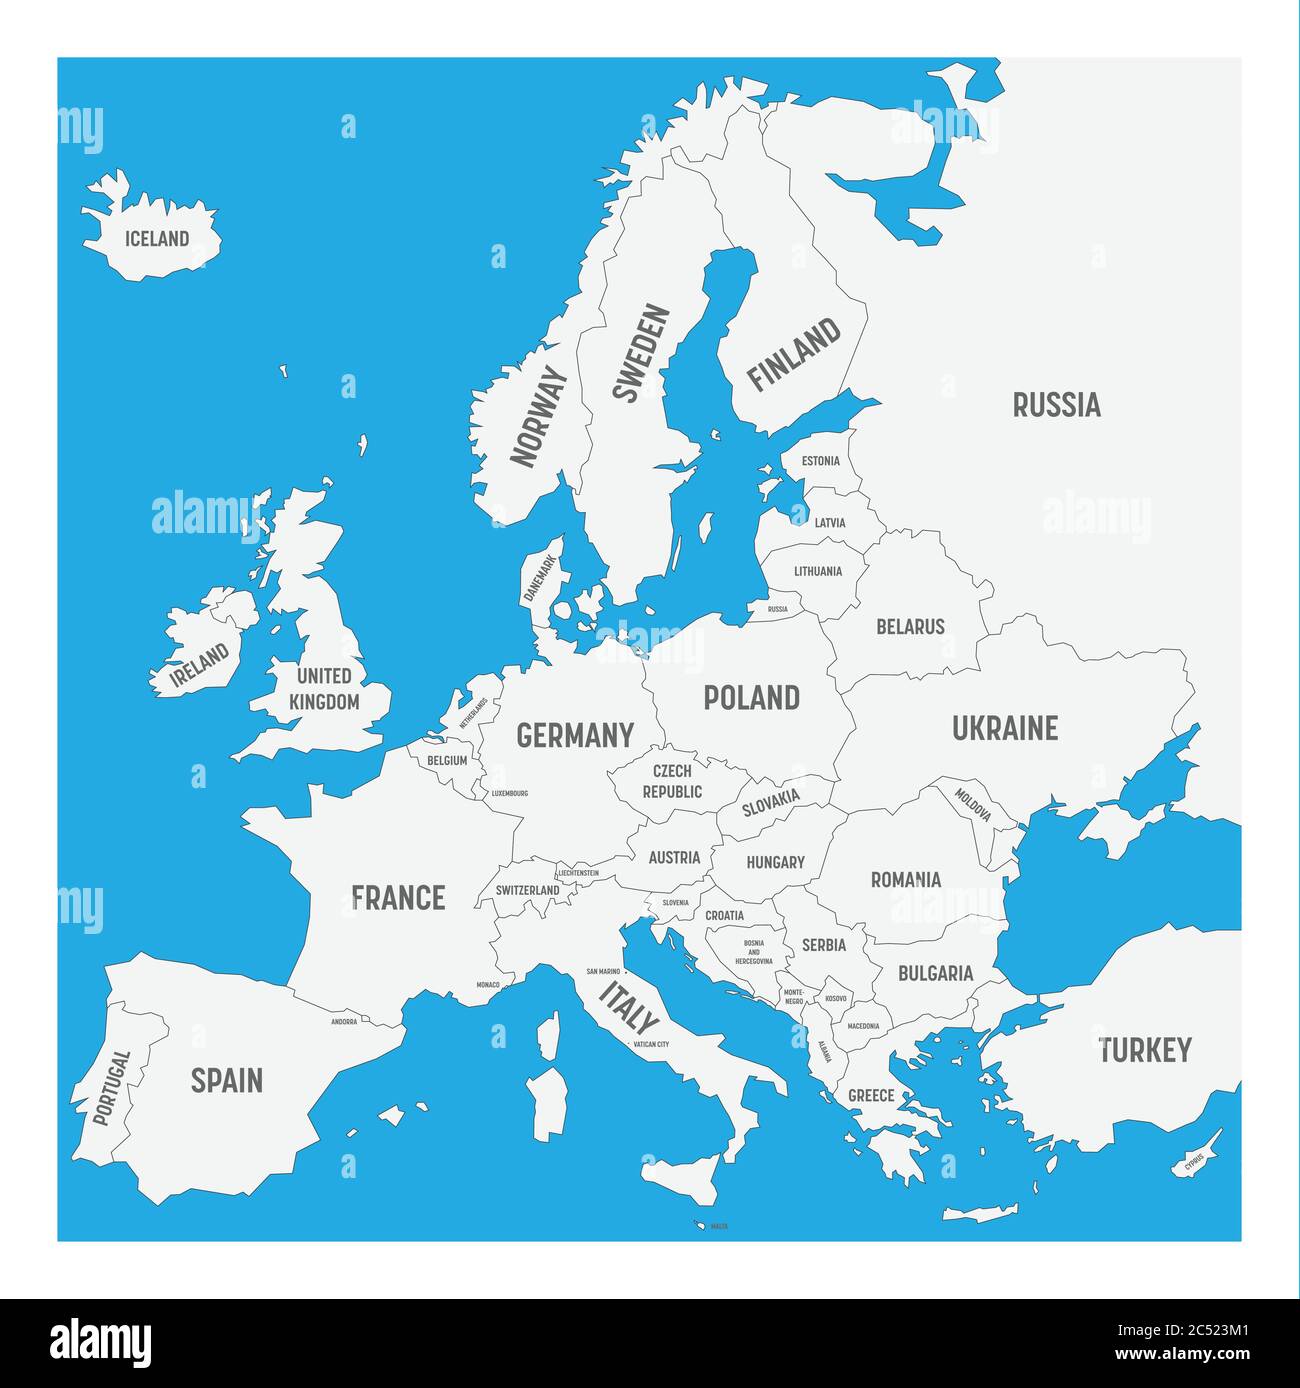 Map of Europe with names of sovereign countries, ministates included. Simplified black vector map on white background. Stock Vector